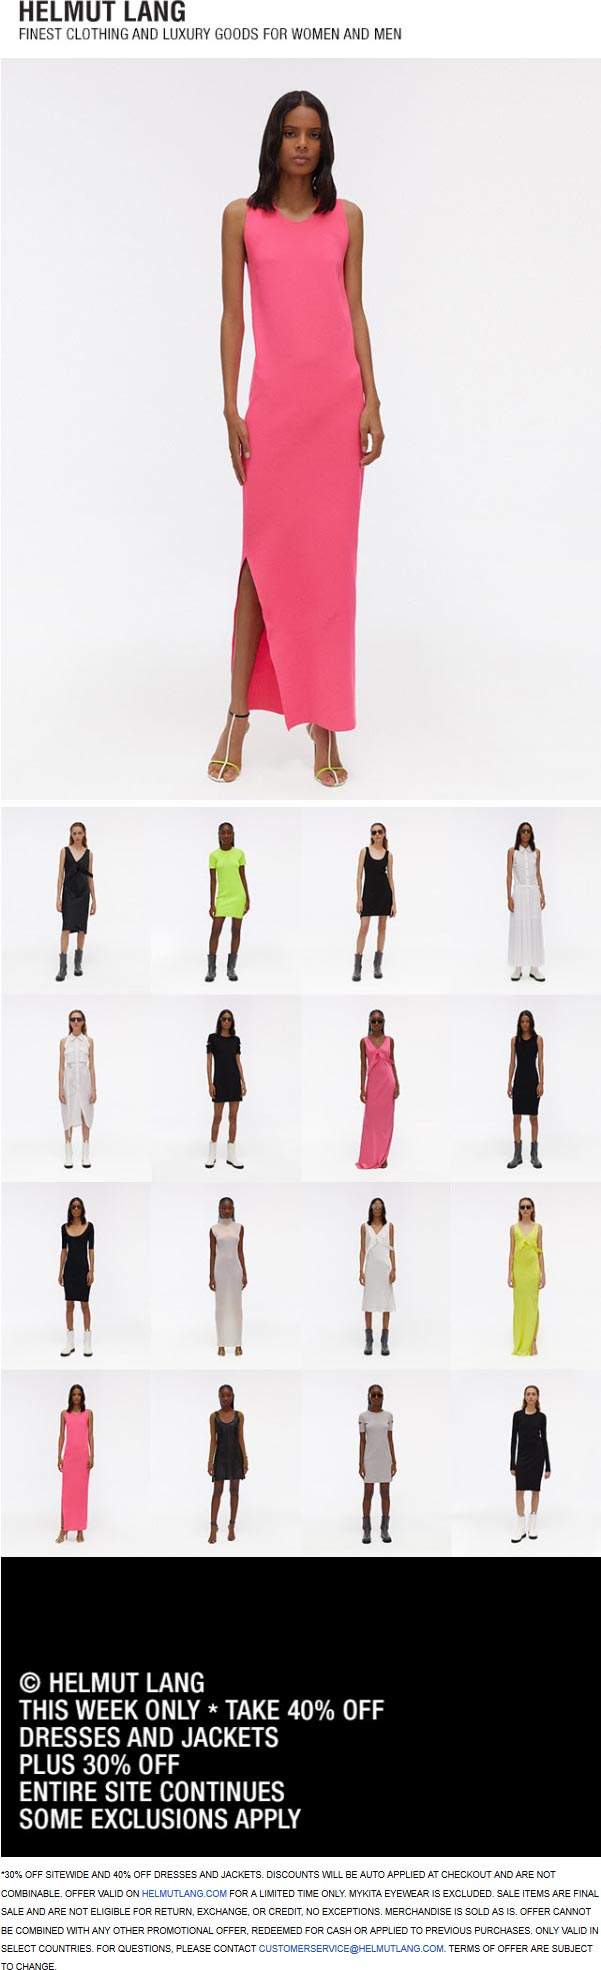 Helmut Lang stores Coupon  30% off everything & 40% off dresses and jackets at Helmut Lang #helmutlang